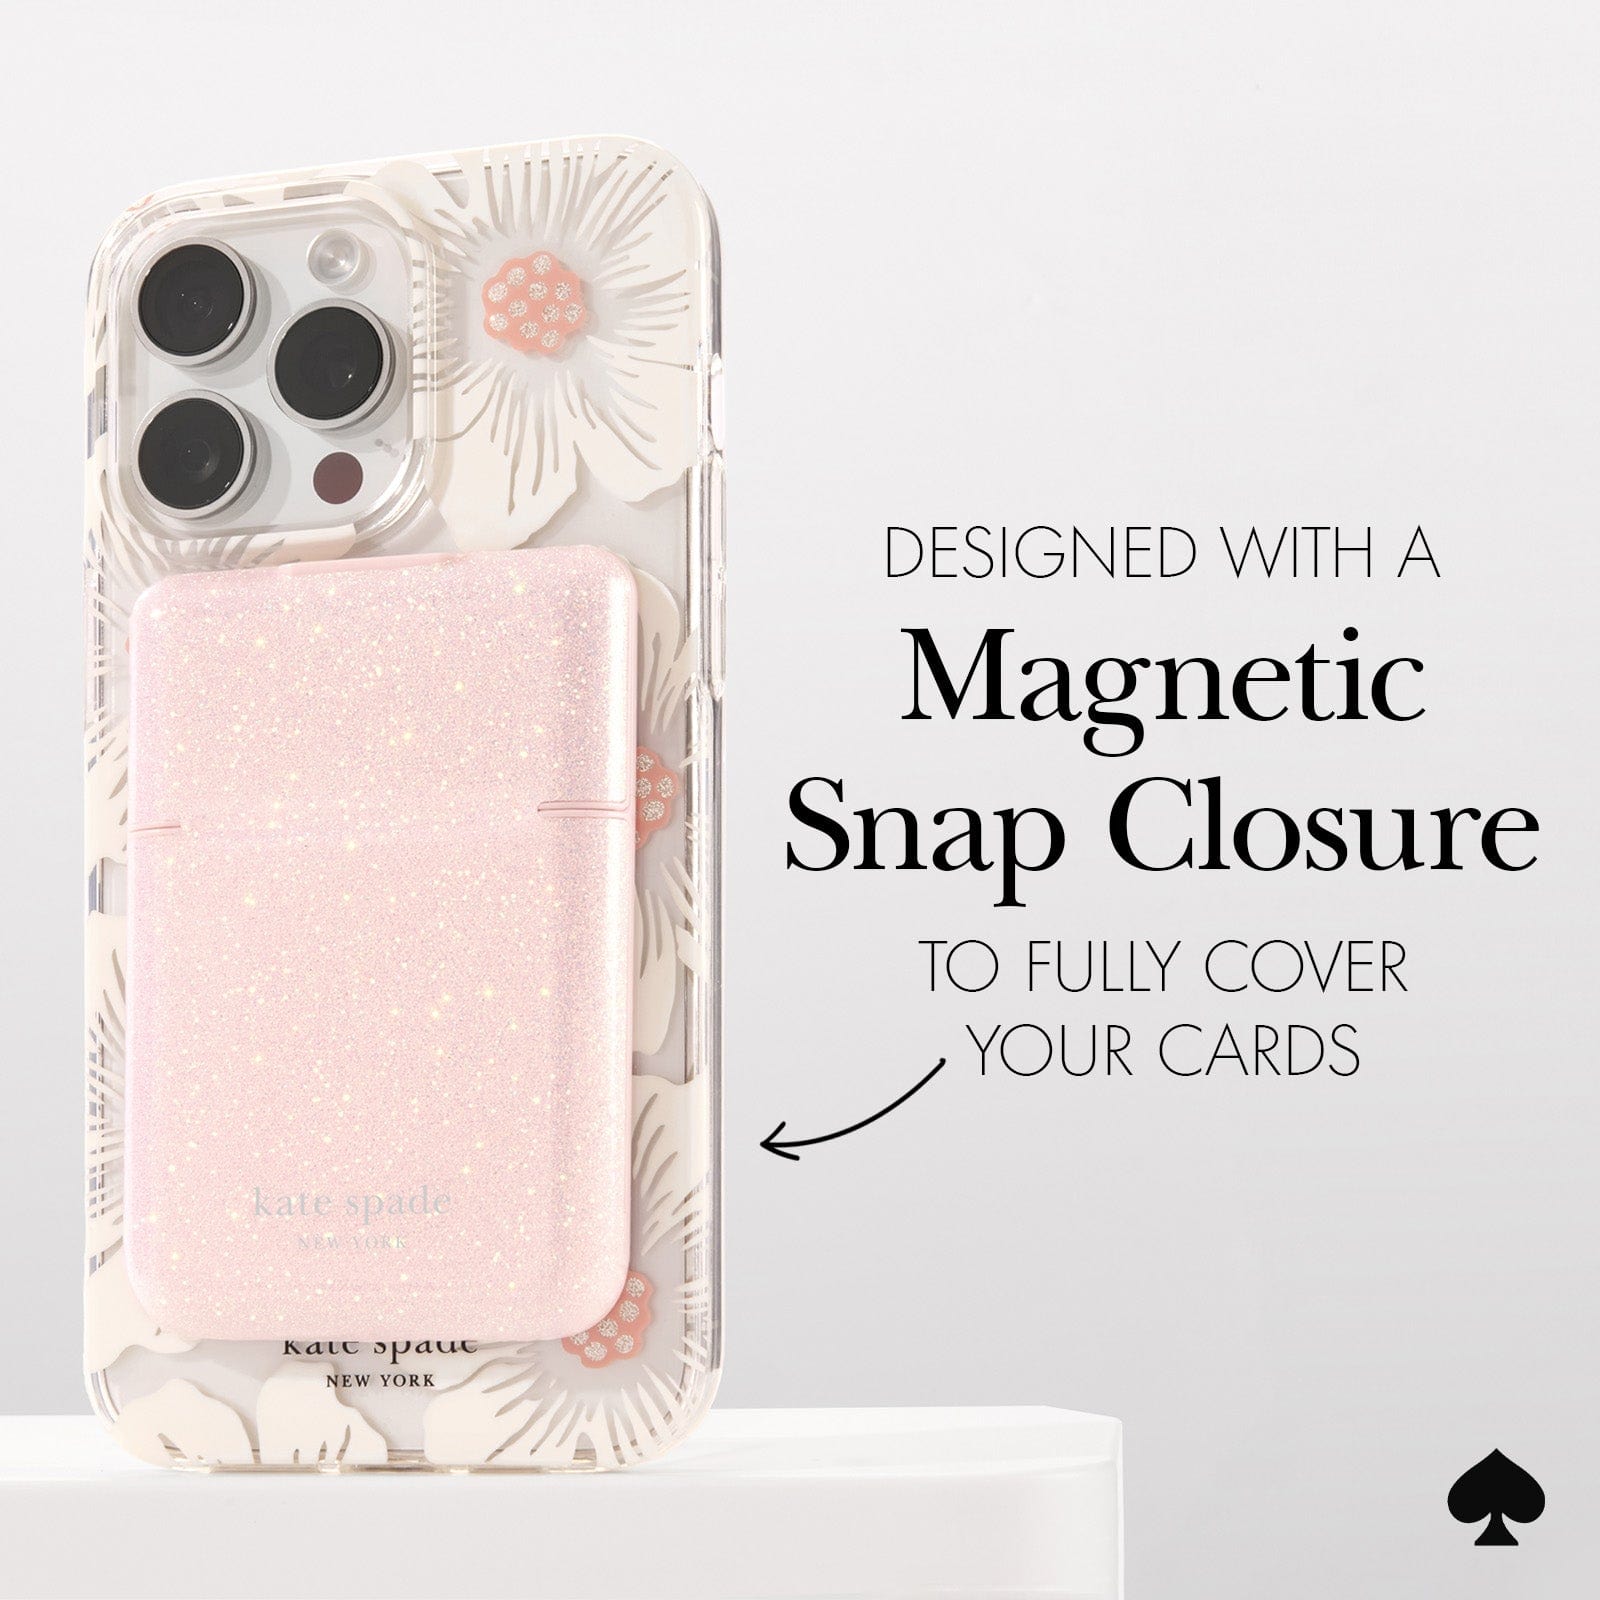 DESIGNED WITH A MAGNETIC SNAP CLOSURE TO FULLY COVER YOUR CARDS